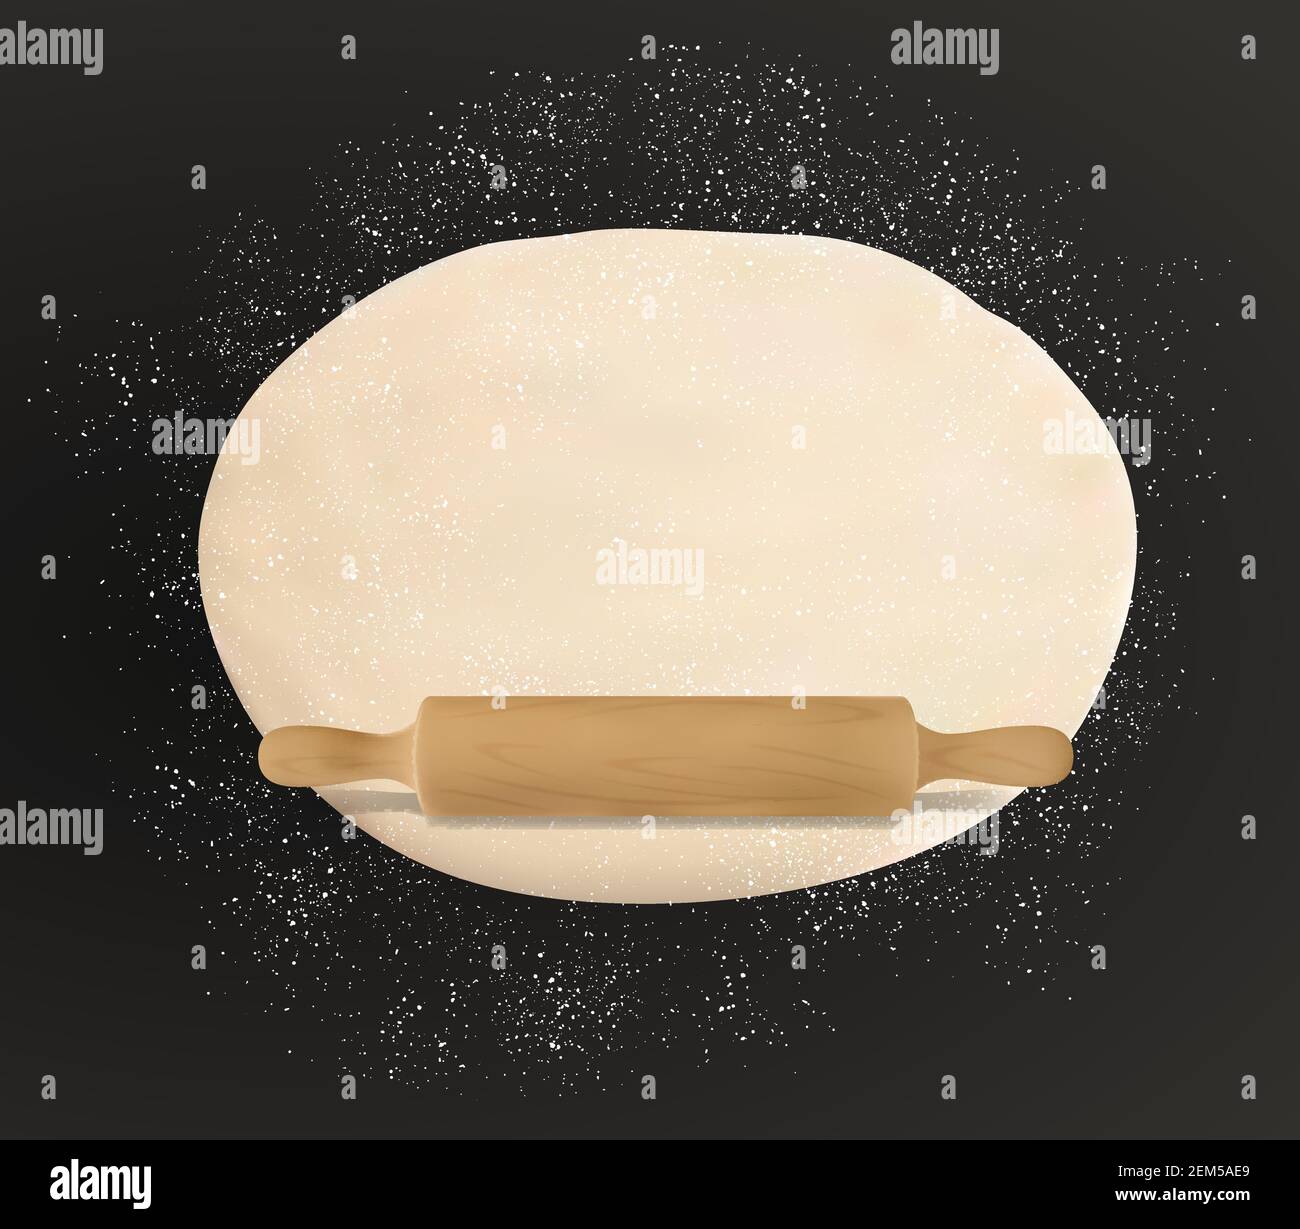 Dough, rolling pin and flour on table, rolled pastry food. Vector pizza dough kneading on black, patisserie and bakery. Homemade domestic bread and ki Stock Vector